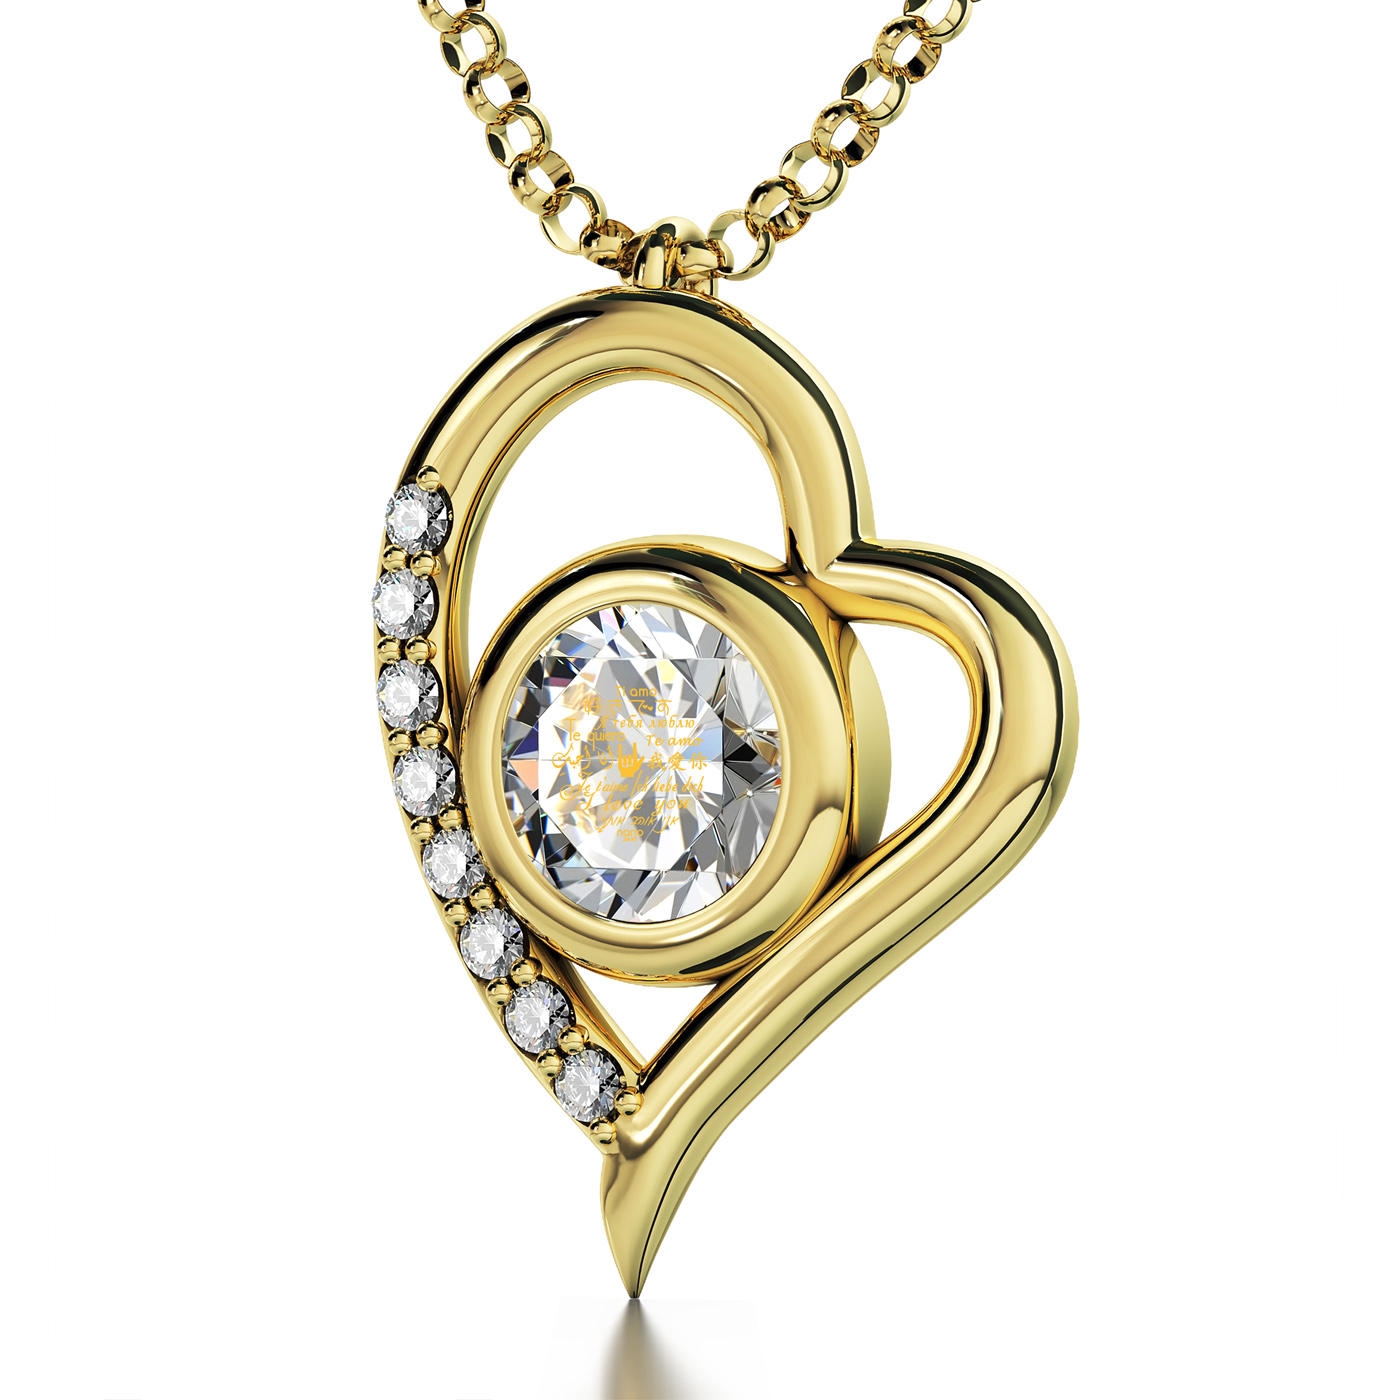 "I Love You" in 12 Languages: 24K Gold Plated and Swarovski Stone Heart Necklace Micro-Inscribed with 24K Gold - 1